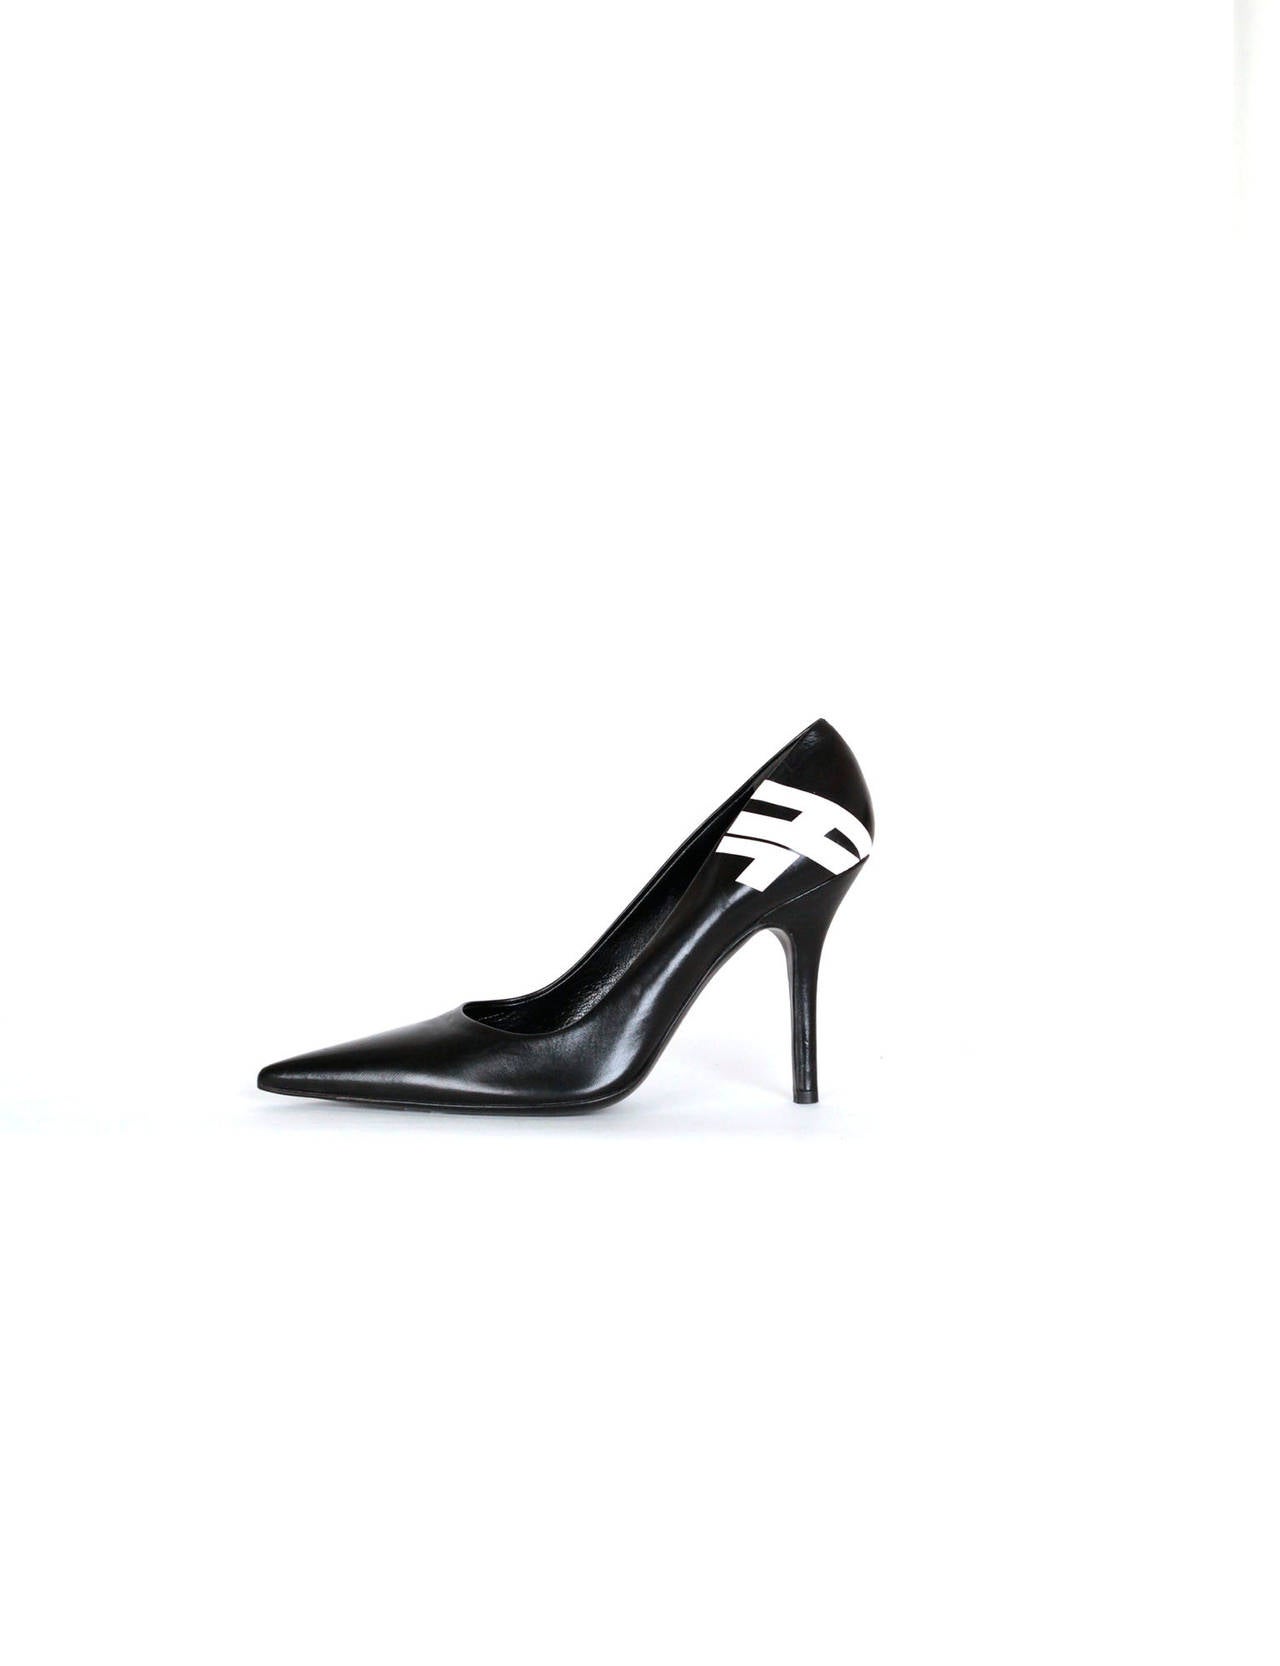 Women's Helmut Lang black pointed pumps with spiked heel